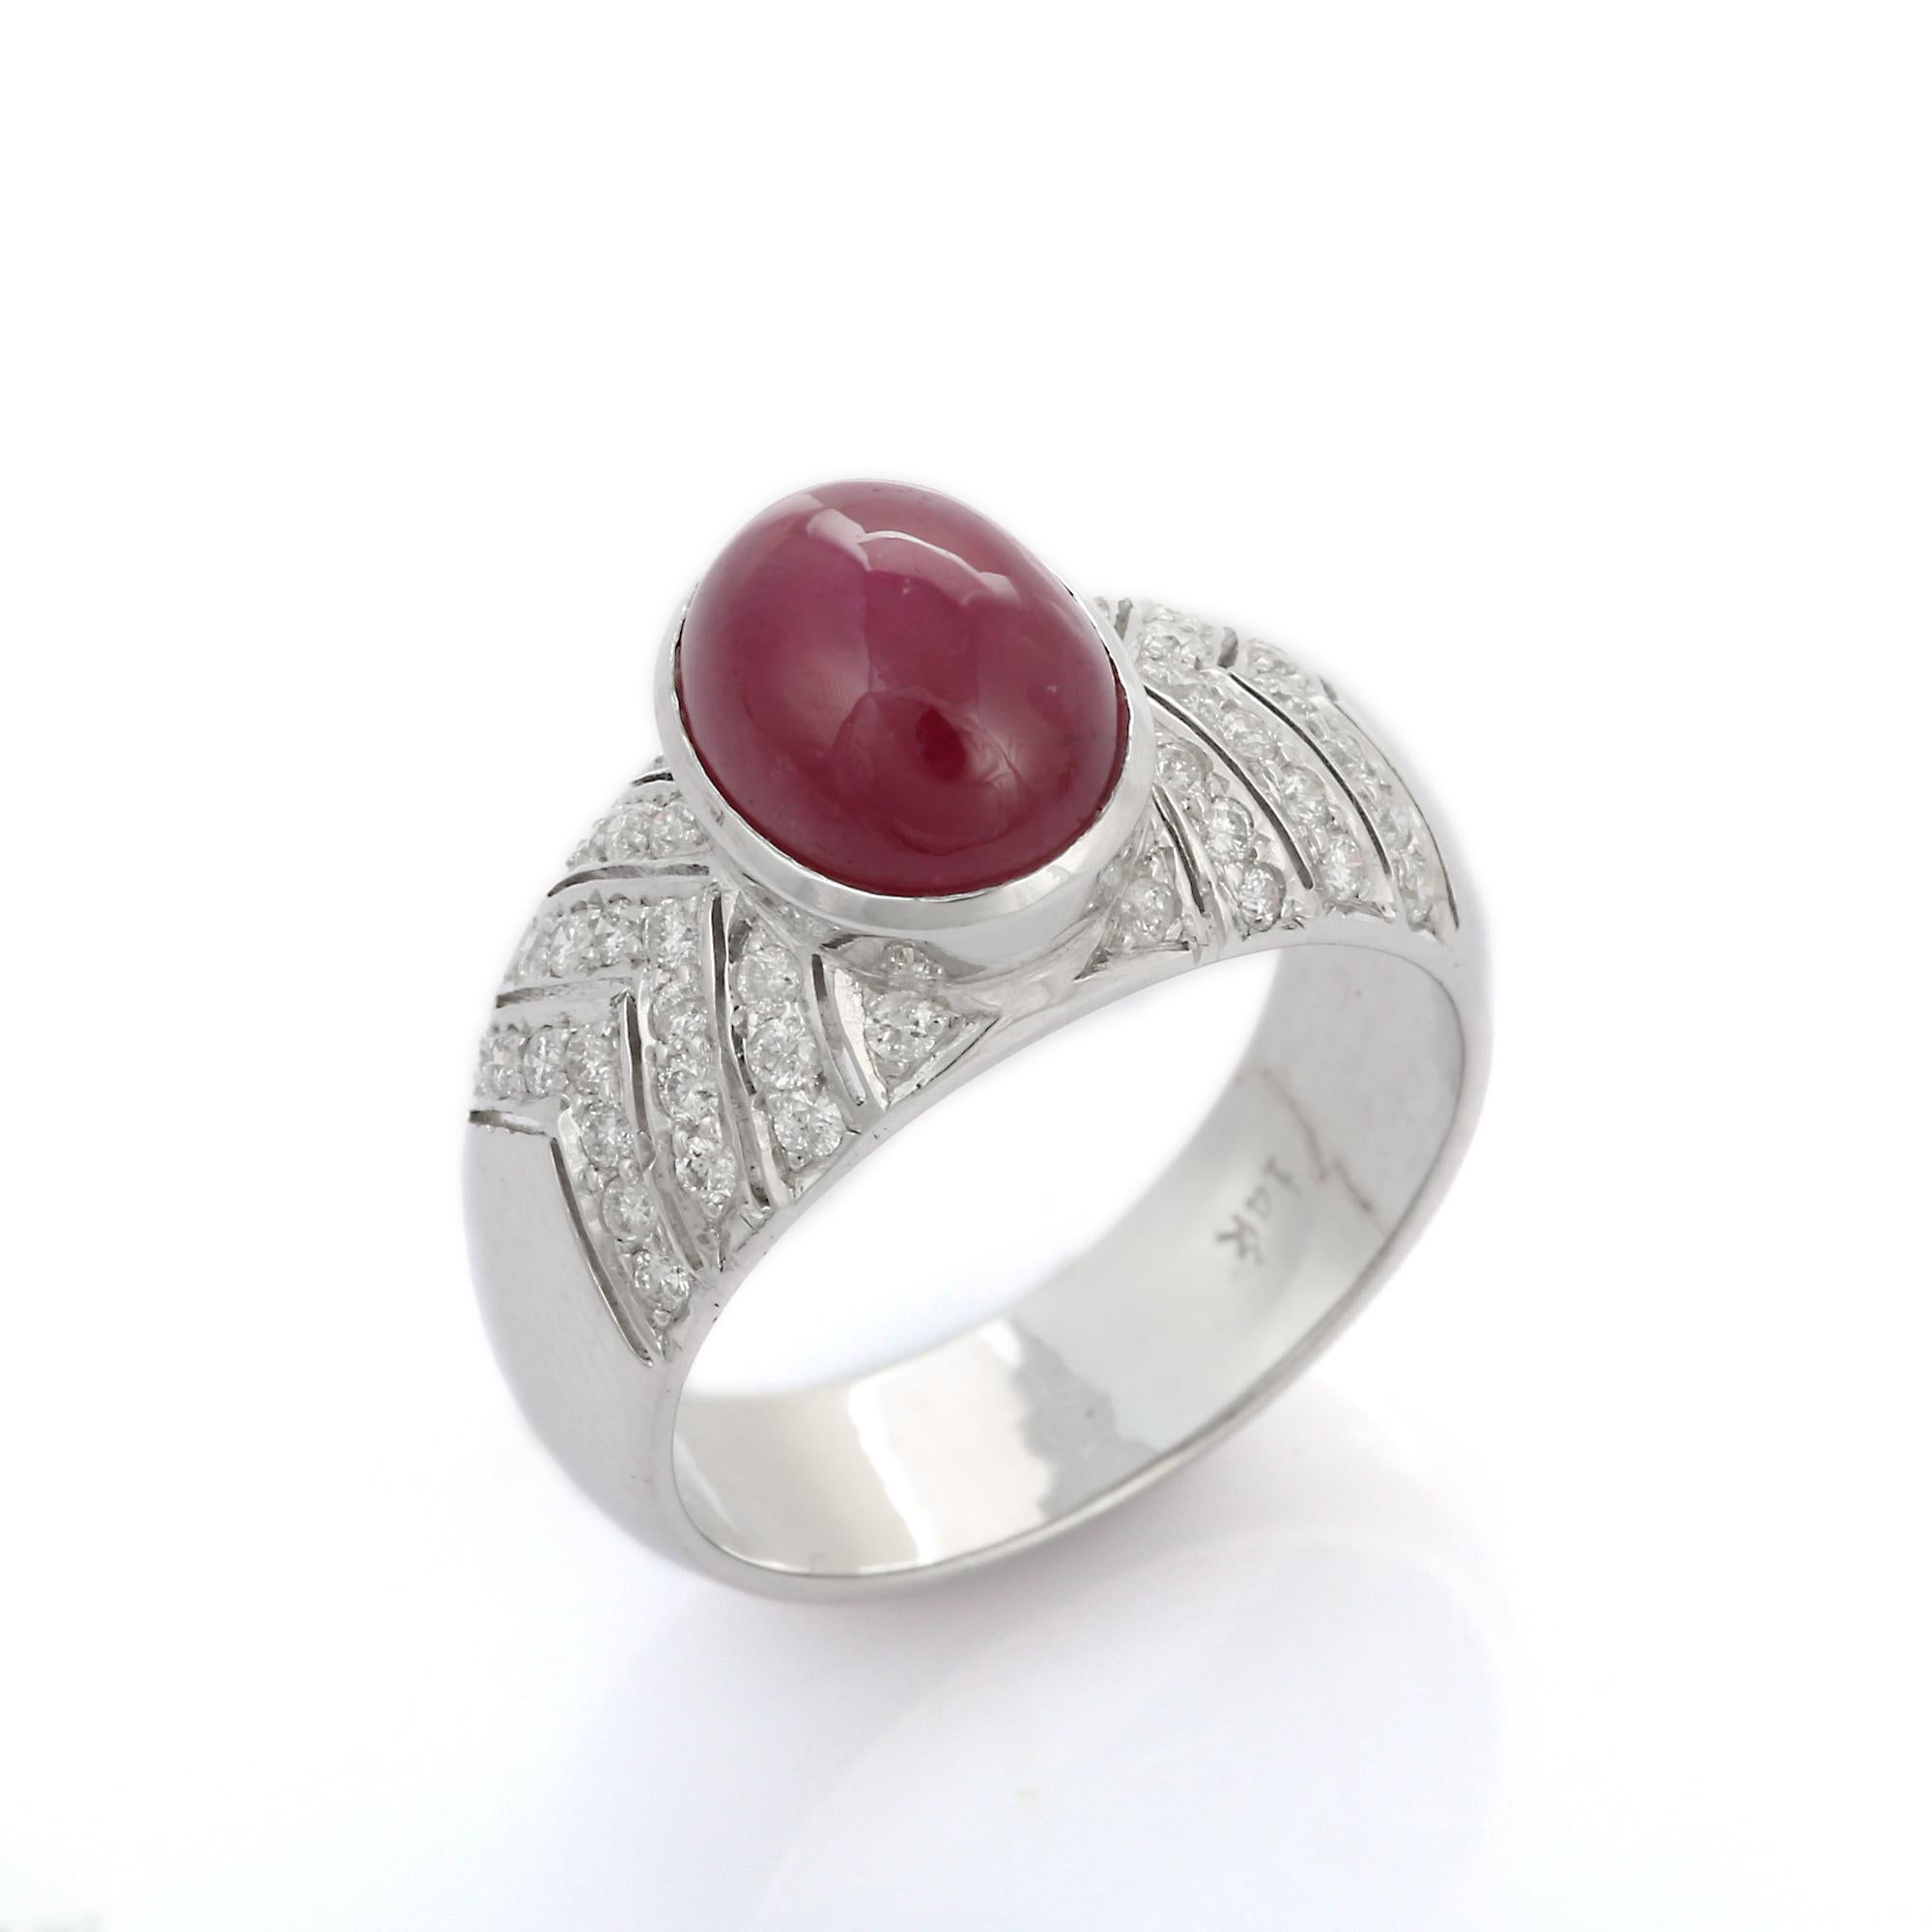 For Sale:  4.56 Carat Cabochon Ruby Cocktail Ring with Diamonds in 14K Solid White Gold 7